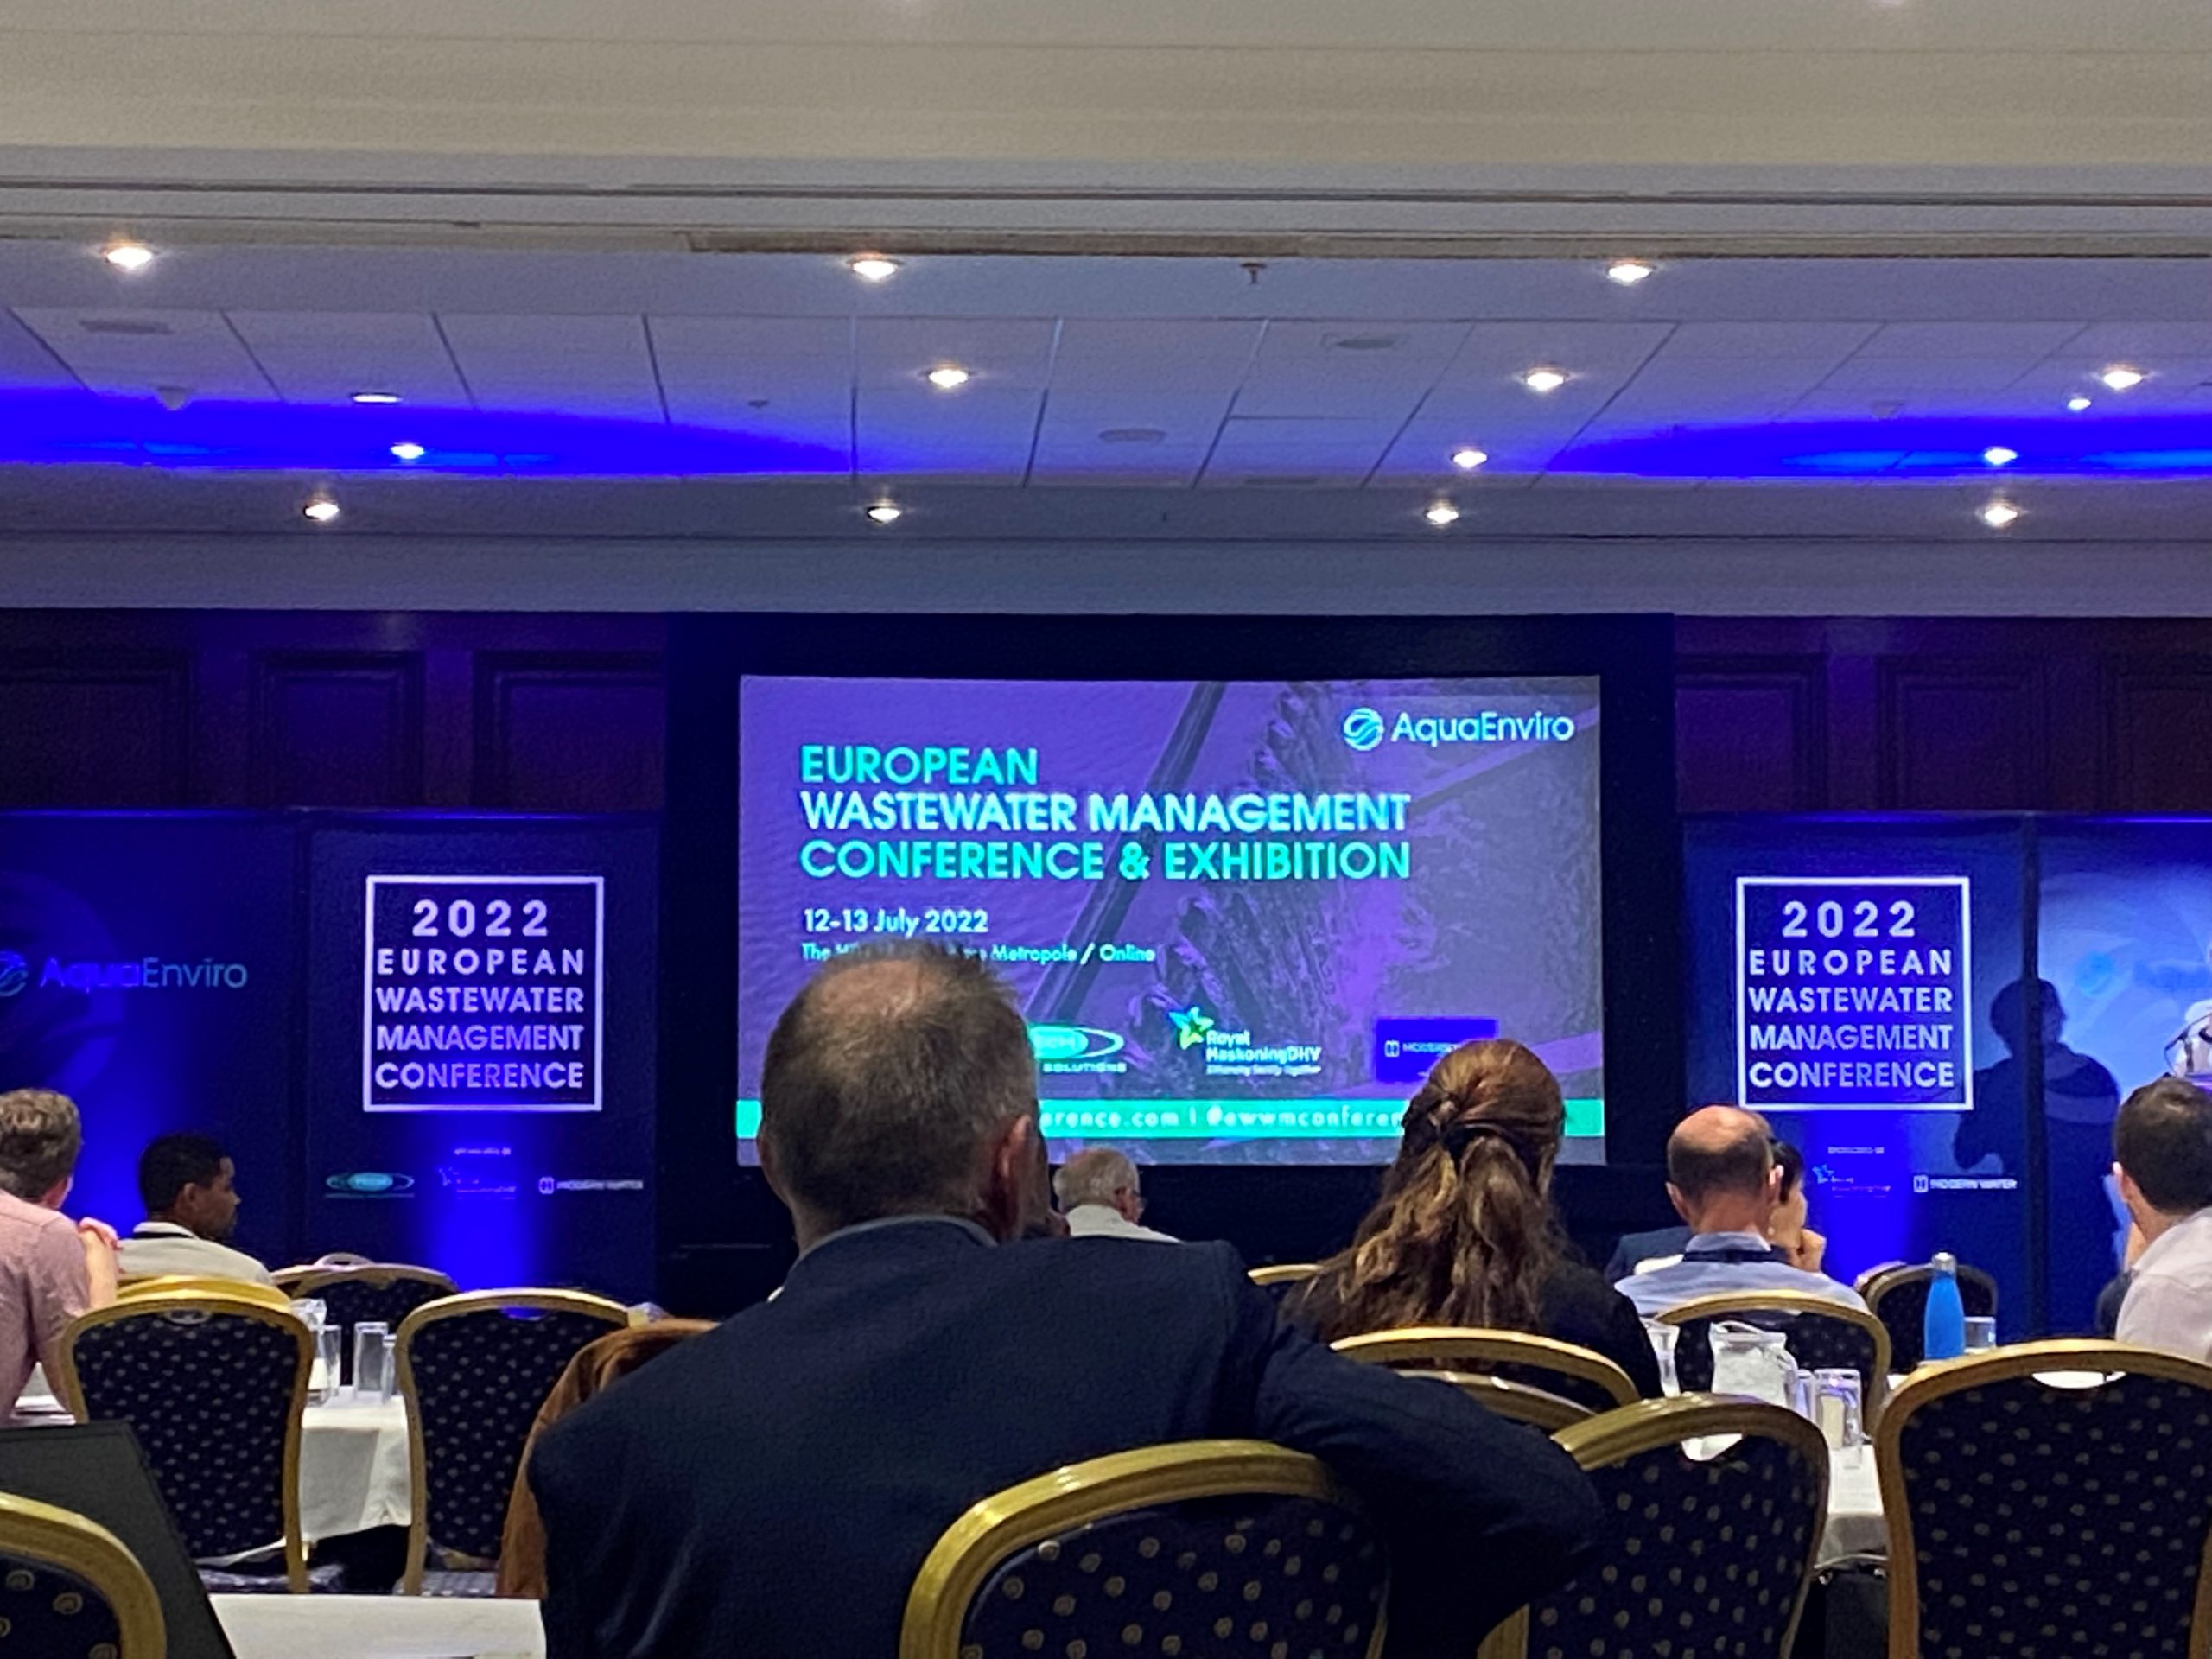 European Wastewater Management Conference didn’t disappoint